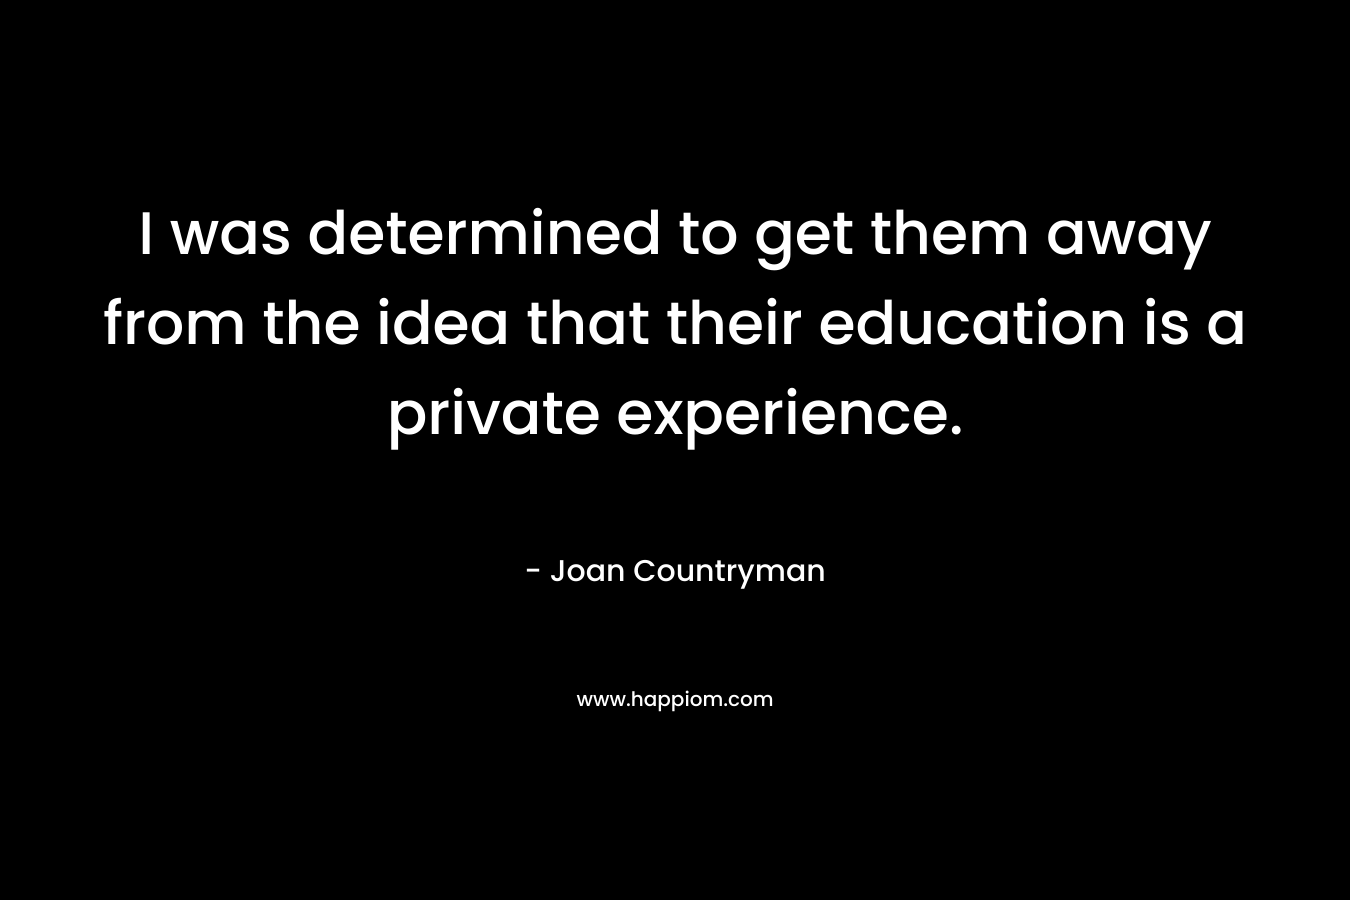 I was determined to get them away from the idea that their education is a private experience. – Joan Countryman